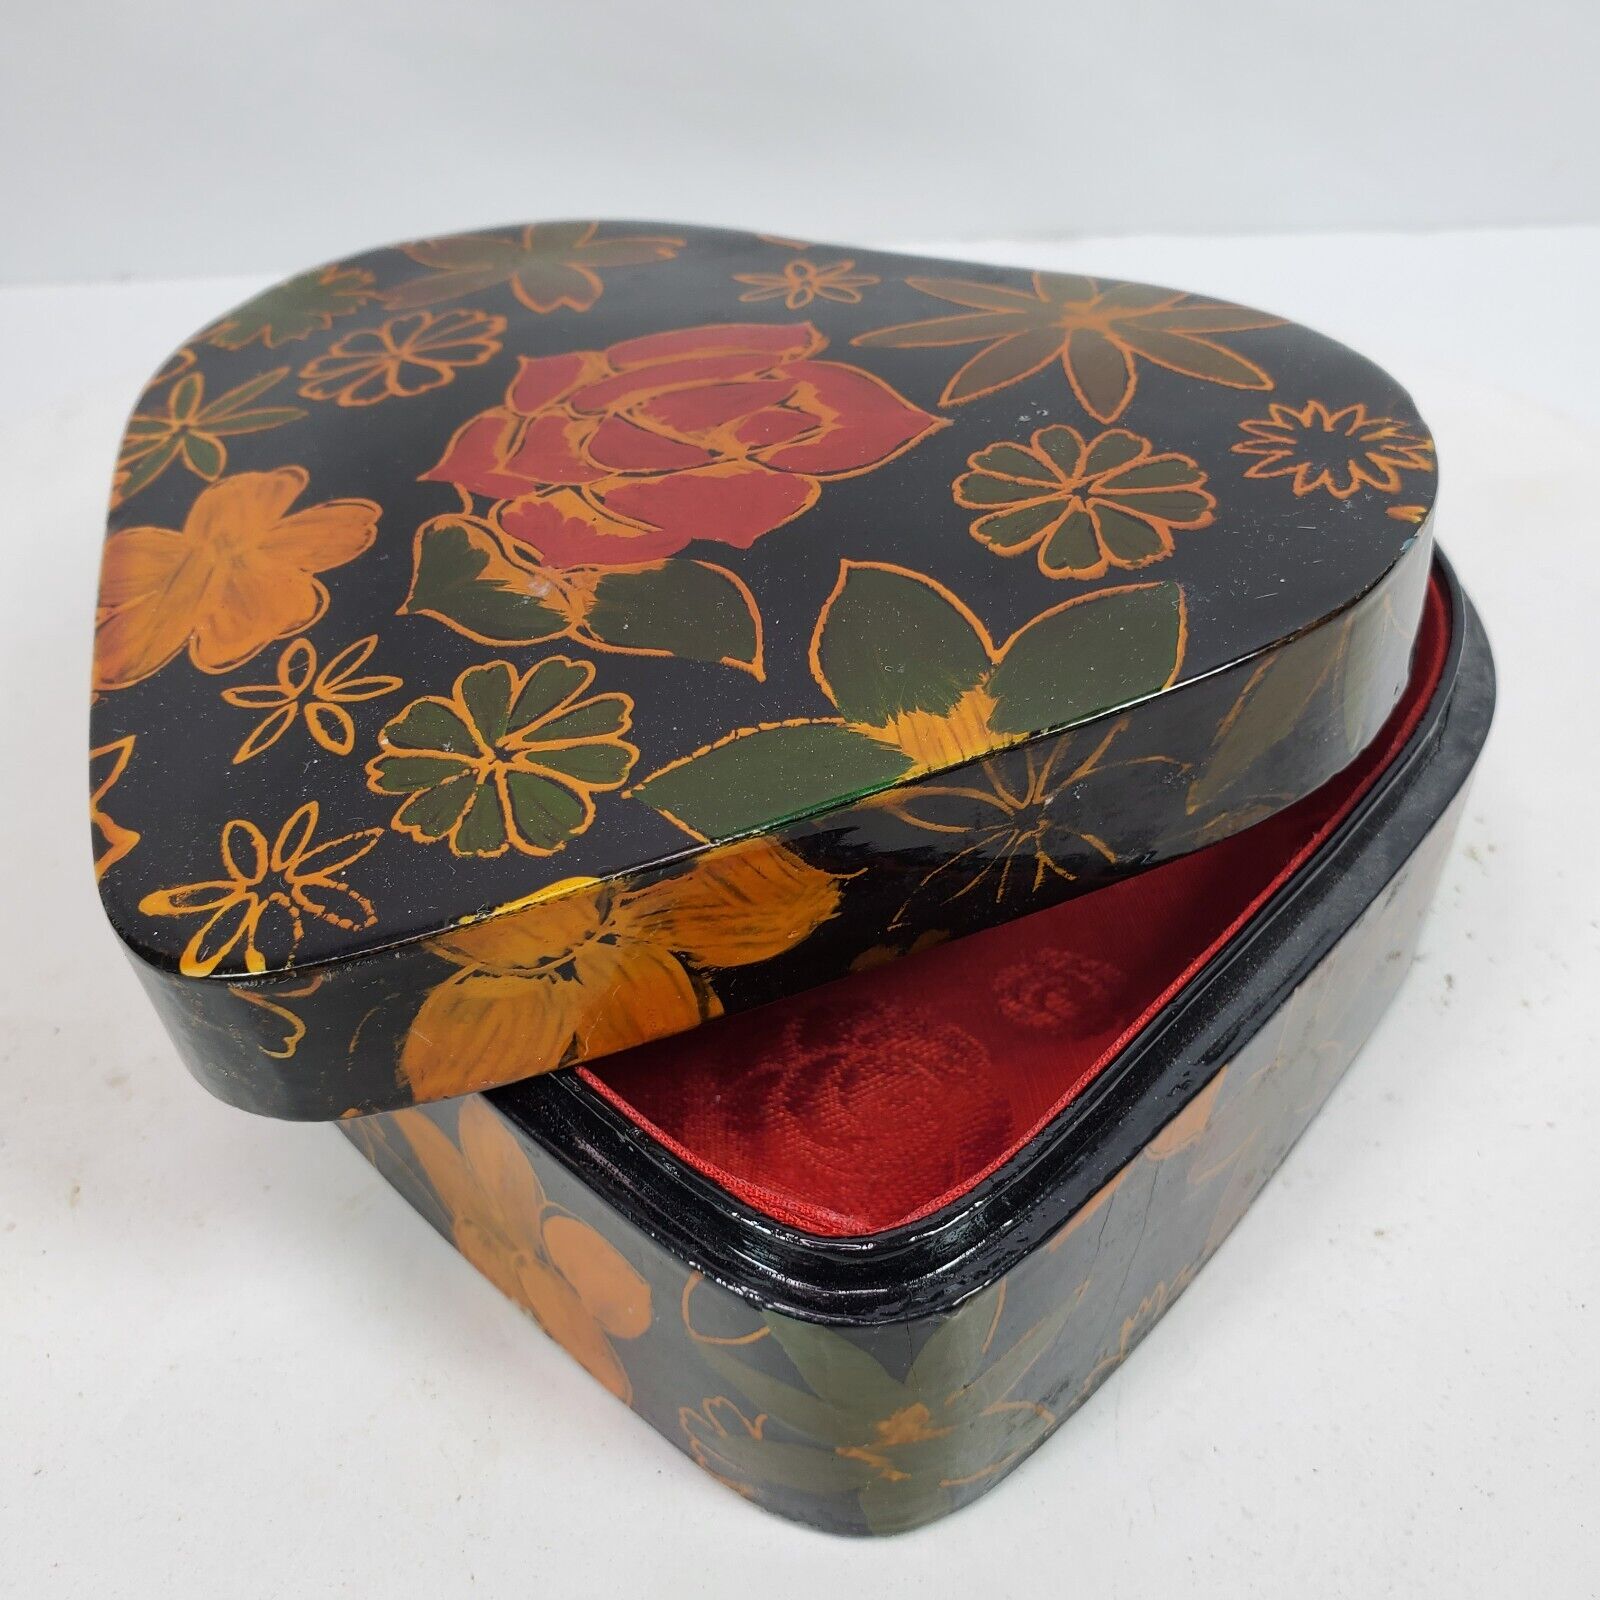 Vintage Republic of China Trinket Box Heart Shape 6x2.5 Inch w/ Serial Number